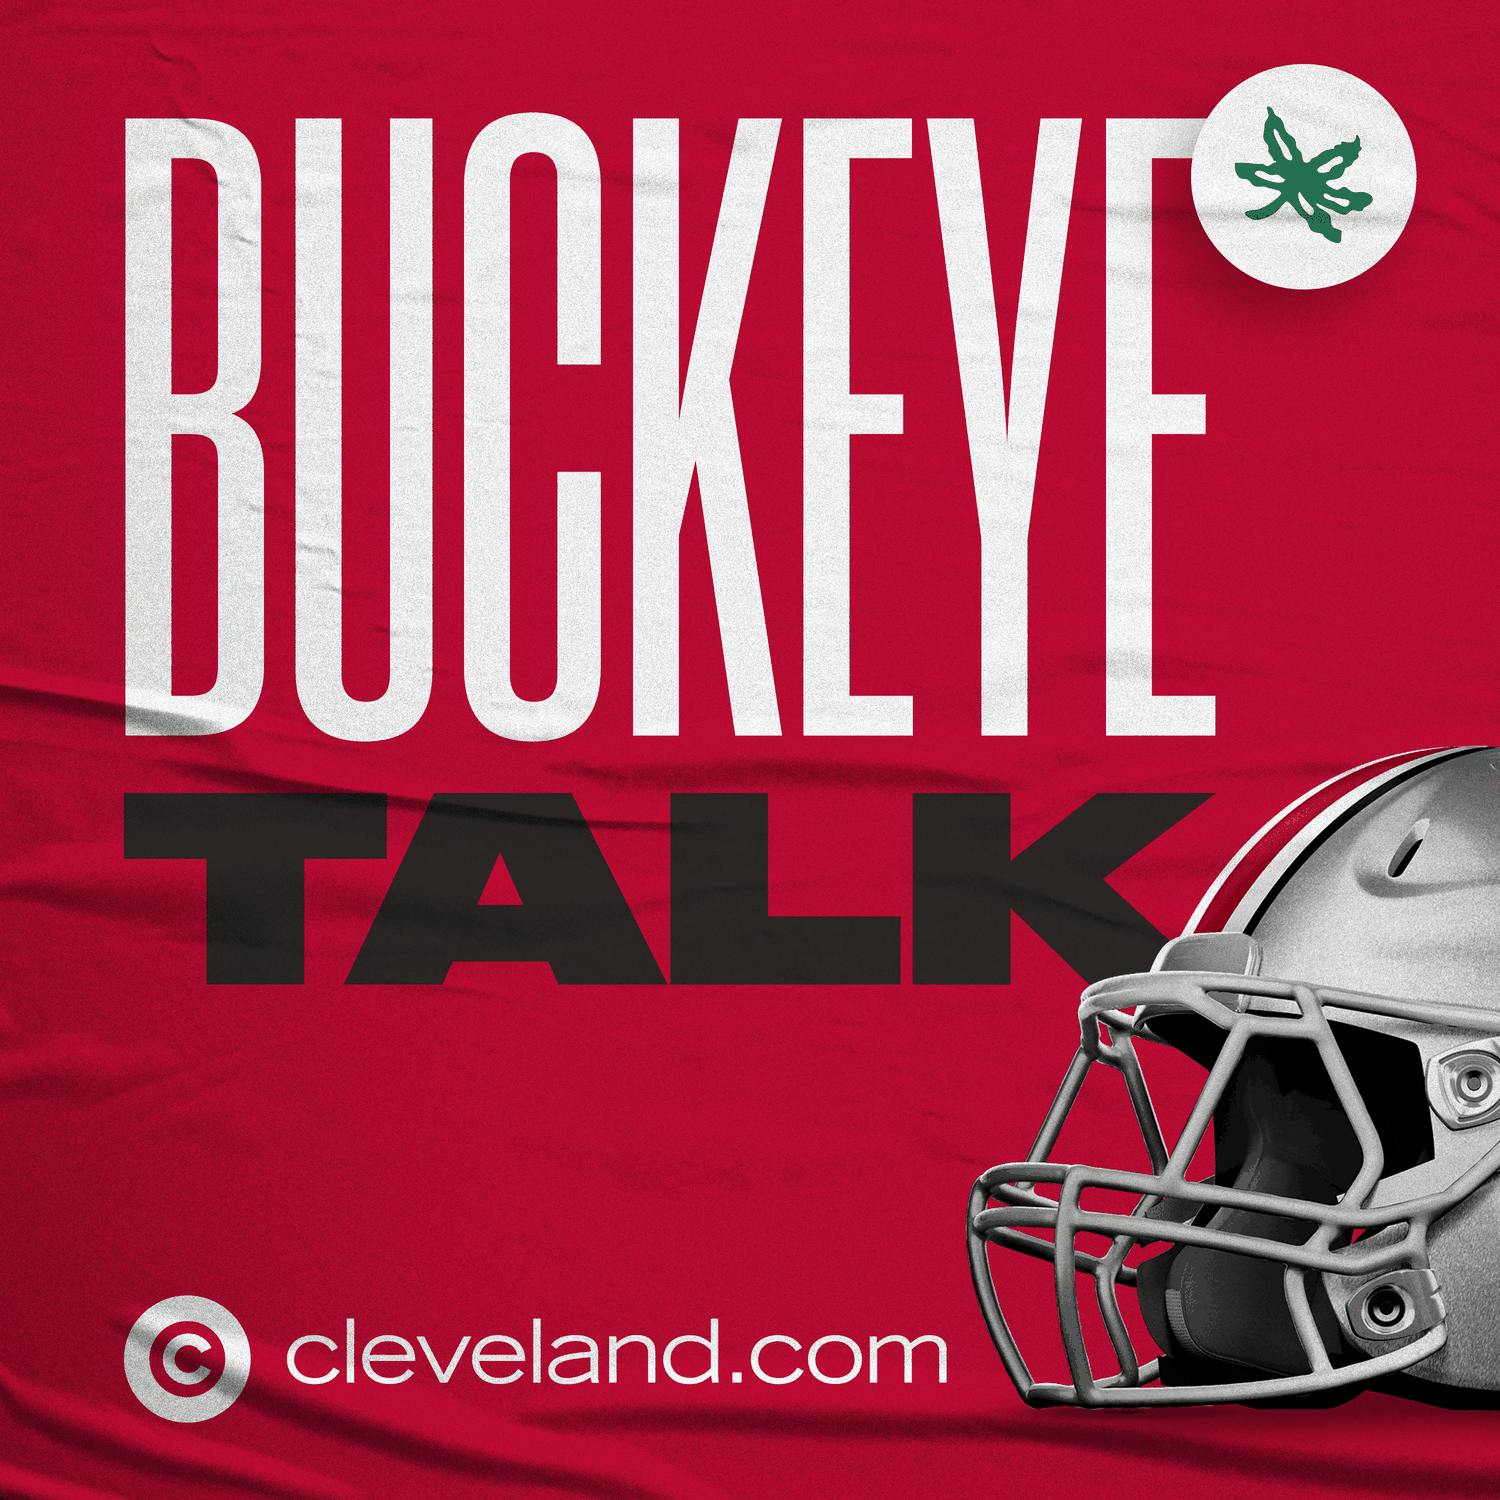 Will players or coaches get more credit if Ohio State's defense improves in 2022? Monday Madness